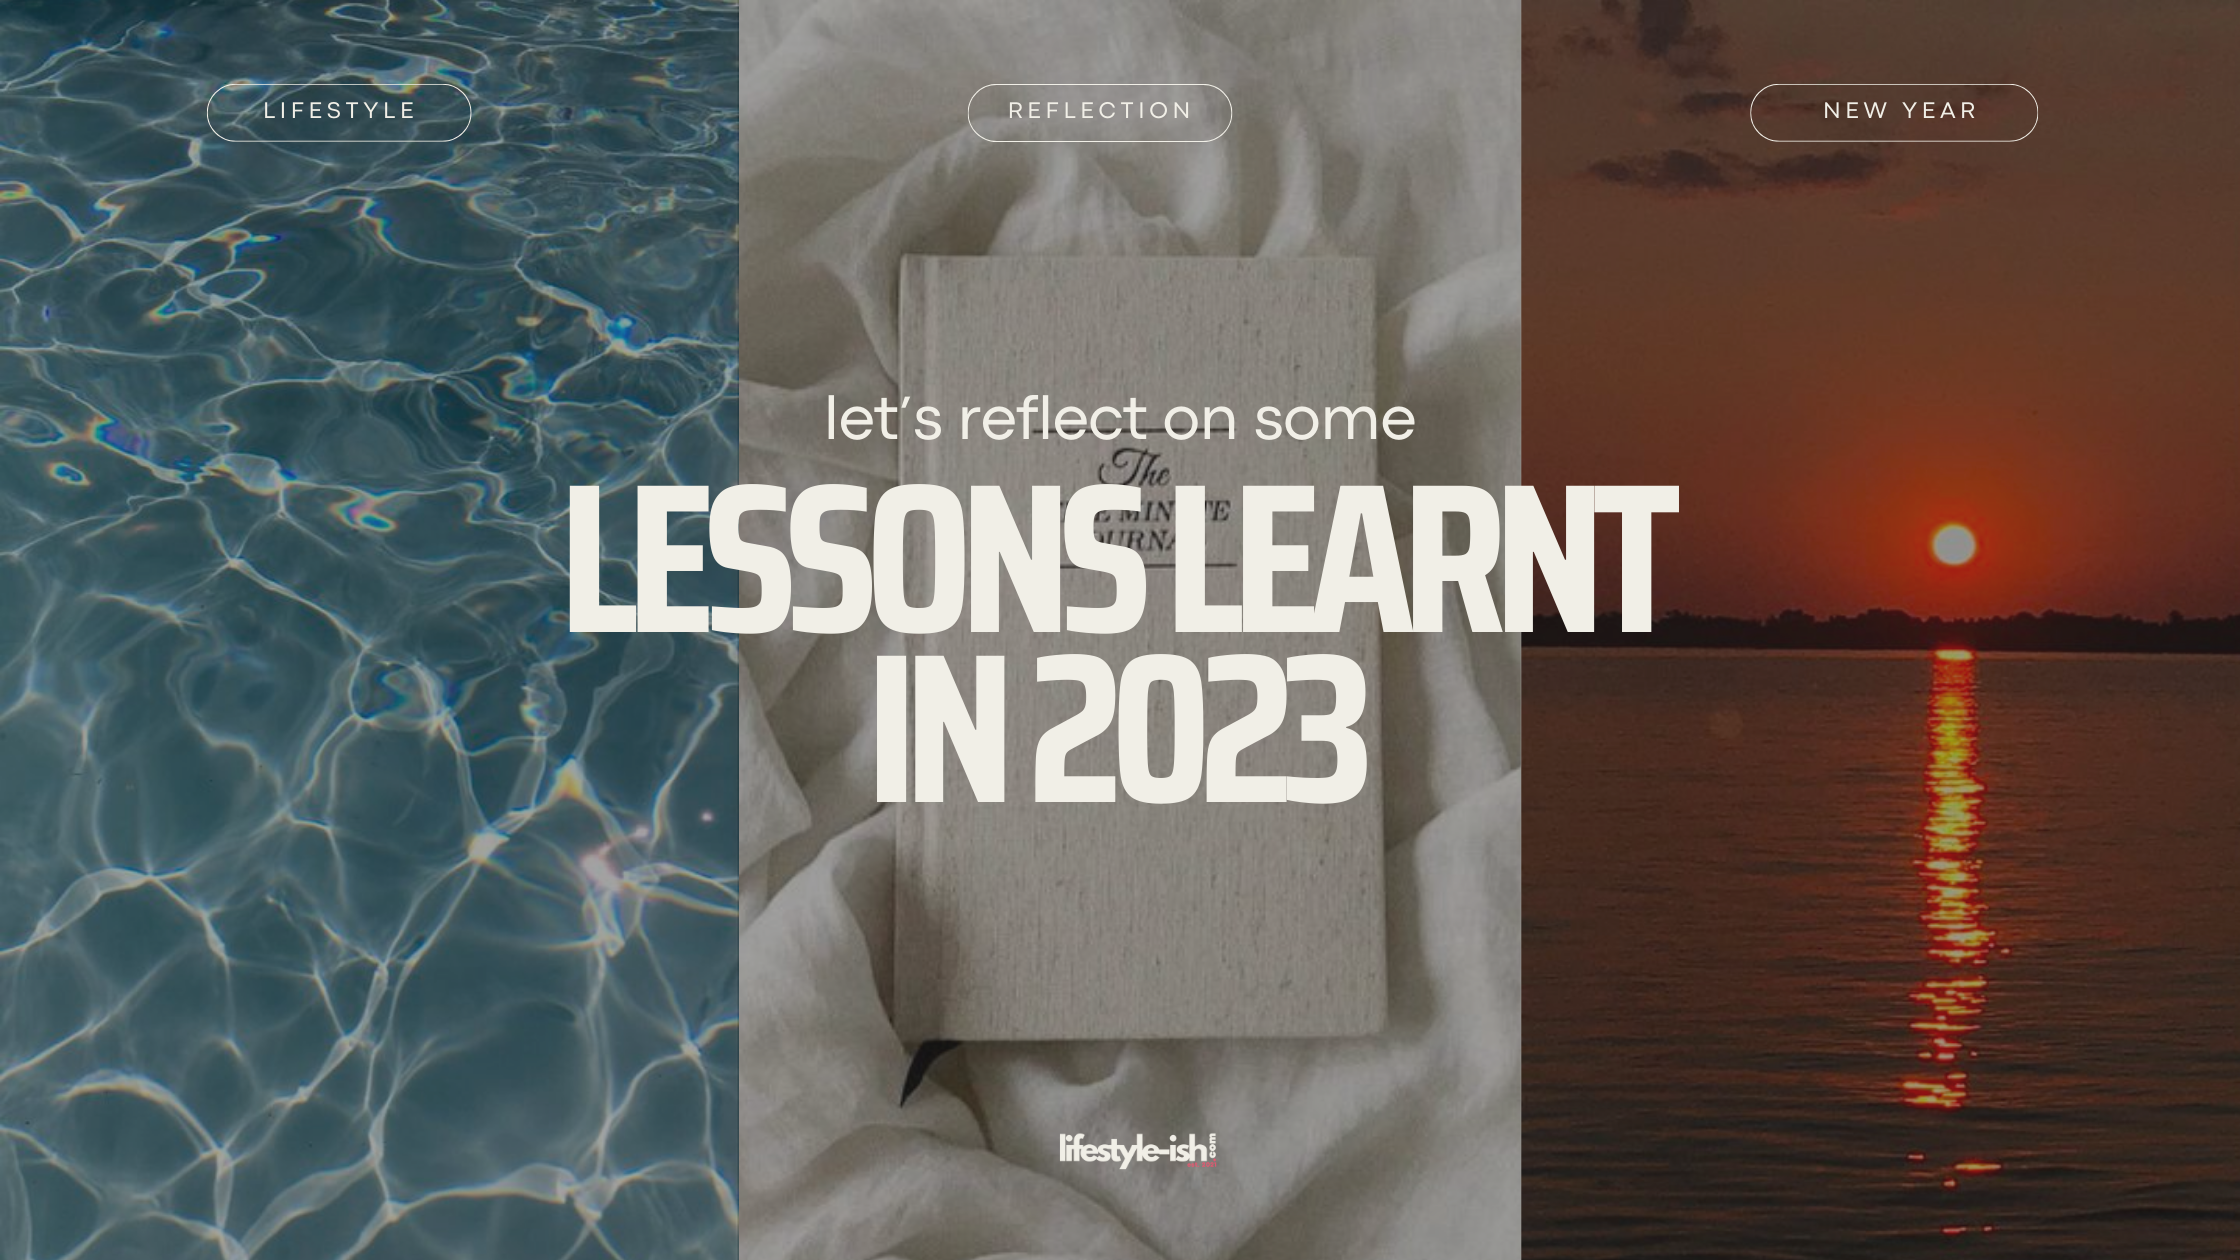 Reflecting on the Year: Lessons learnt in 2023